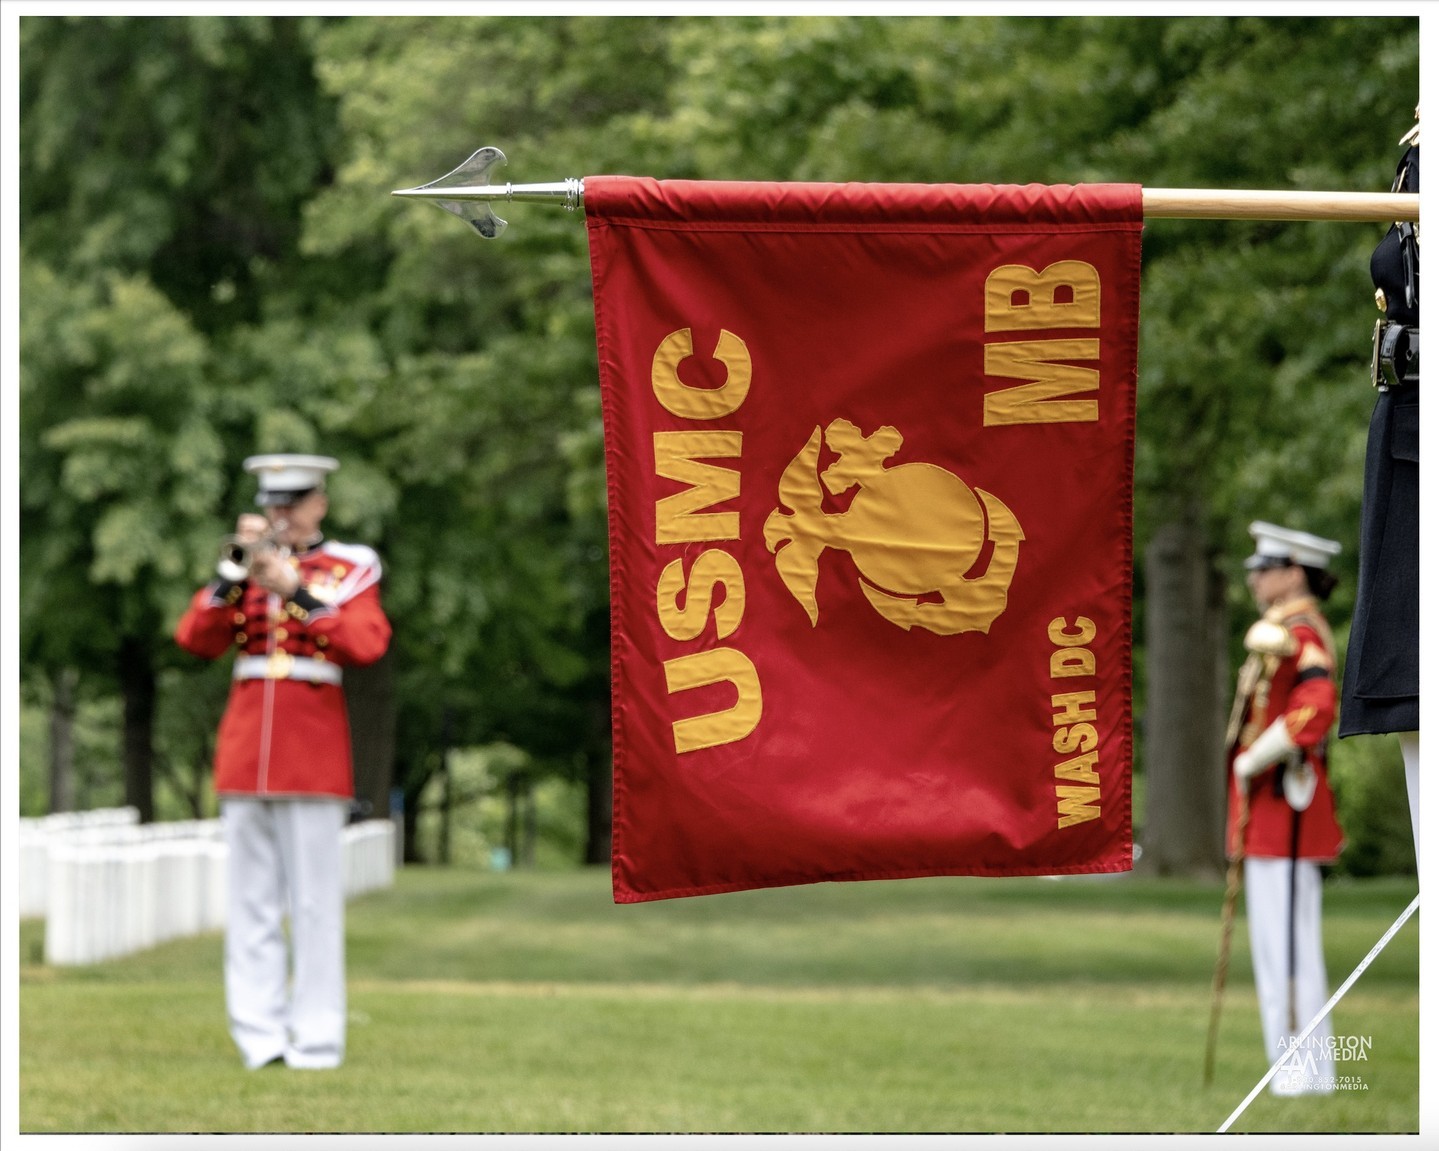 A US Marine band bugler plays taps during a service in Arlington National Cemetery as captured by the @arlingtonmedia team.

During services at Arlington, one can expect our full professional photography and/or videography team to capture your service with multiple cameras, angles, and hidden microphones for full coverage of bugler, firing party, escort platoon, chaplain, and more.

We have been capturing these moments for years, have personal connections to the branches we honor, and try our utmost to capture services the way we would want them to be remembered if it were for our family and generations to come.  We hope each and every family sees this care and attention detail as an extension of our reverence and condolences.